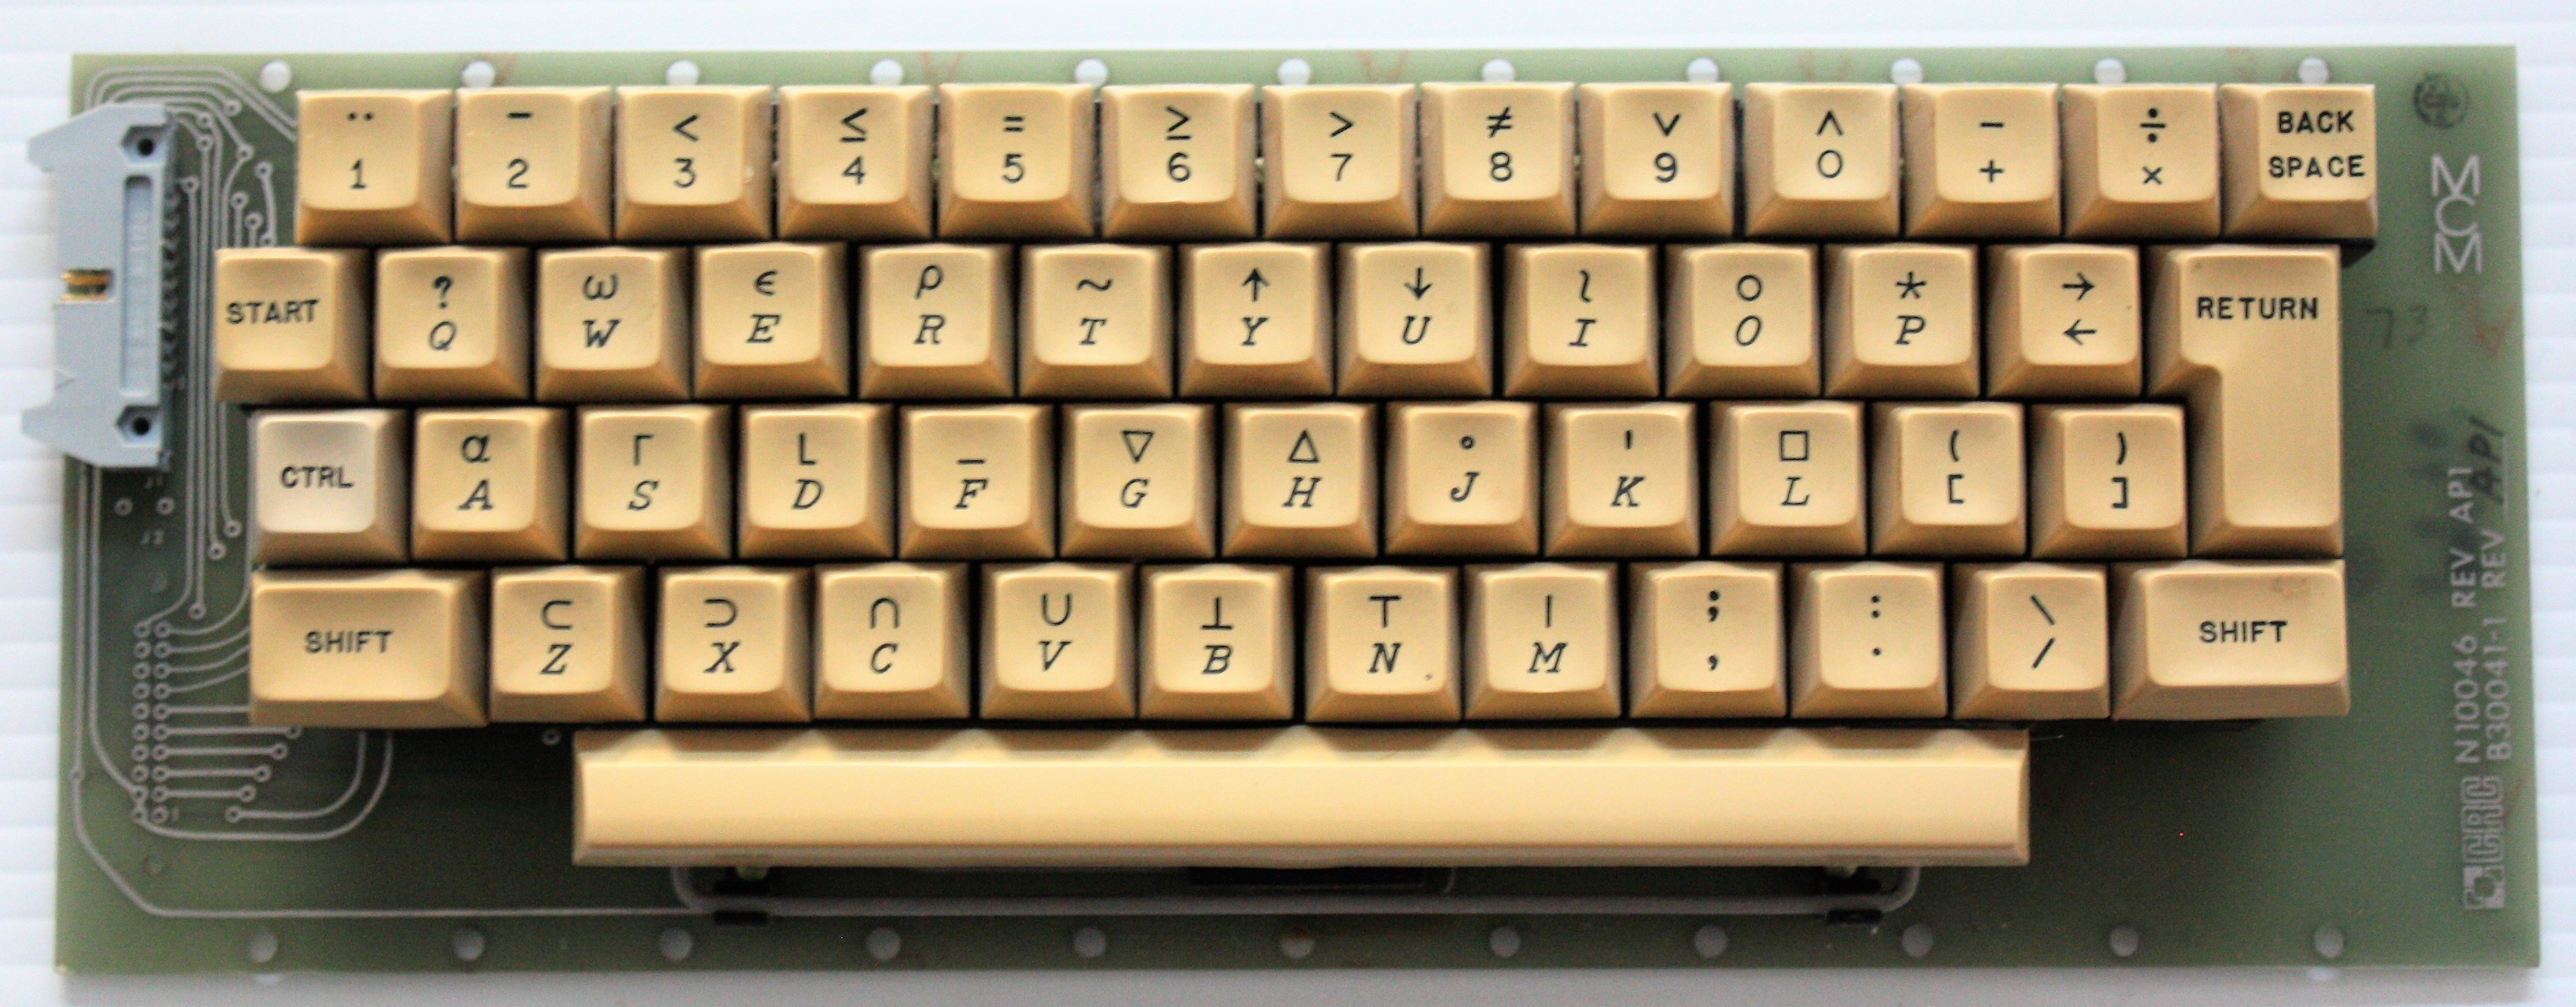 the first computer keyboard